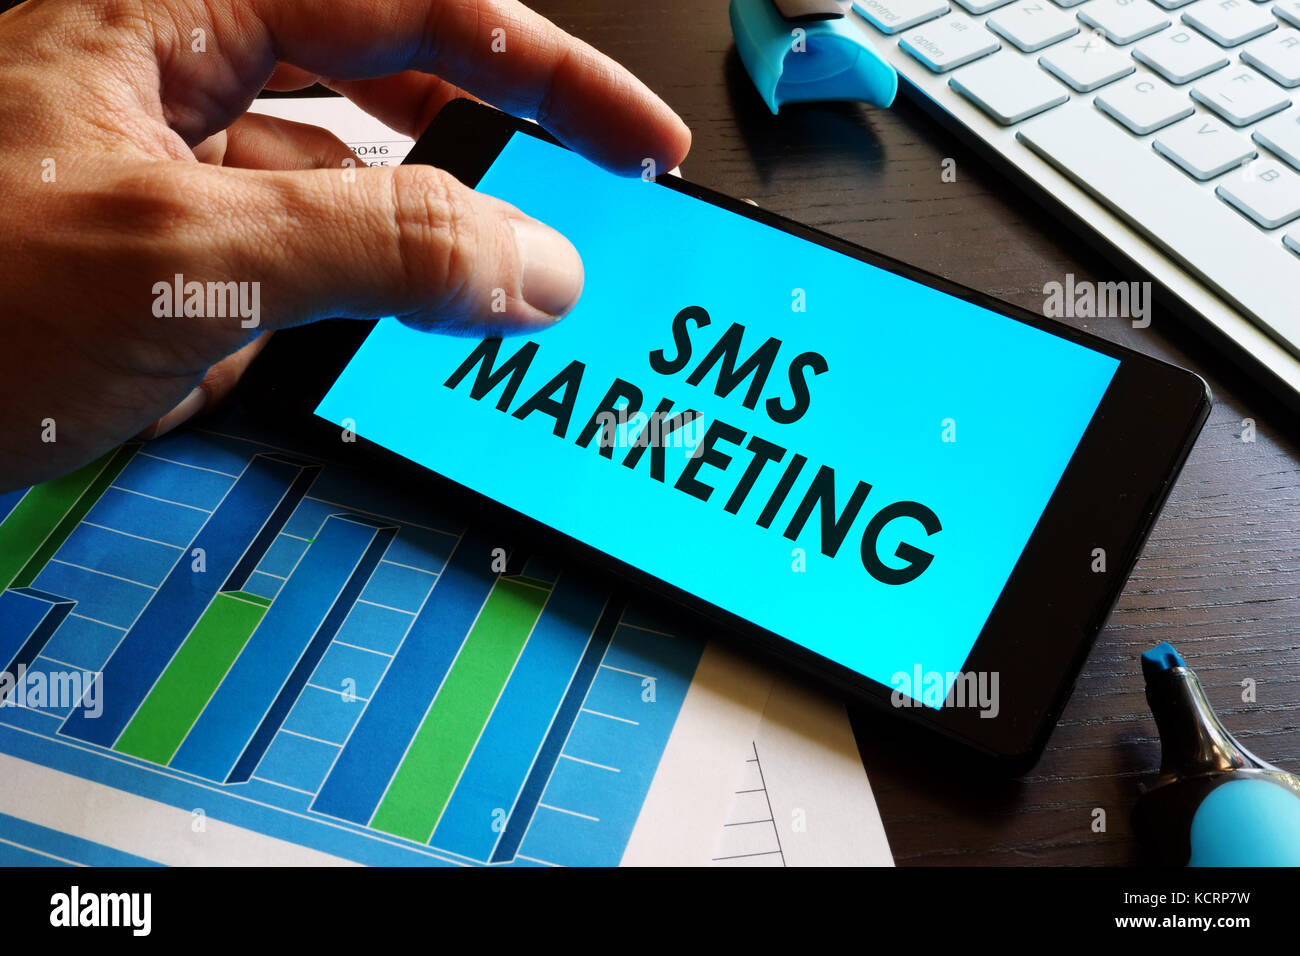 Man holding smartphone with words sms marketing. Stock Photo